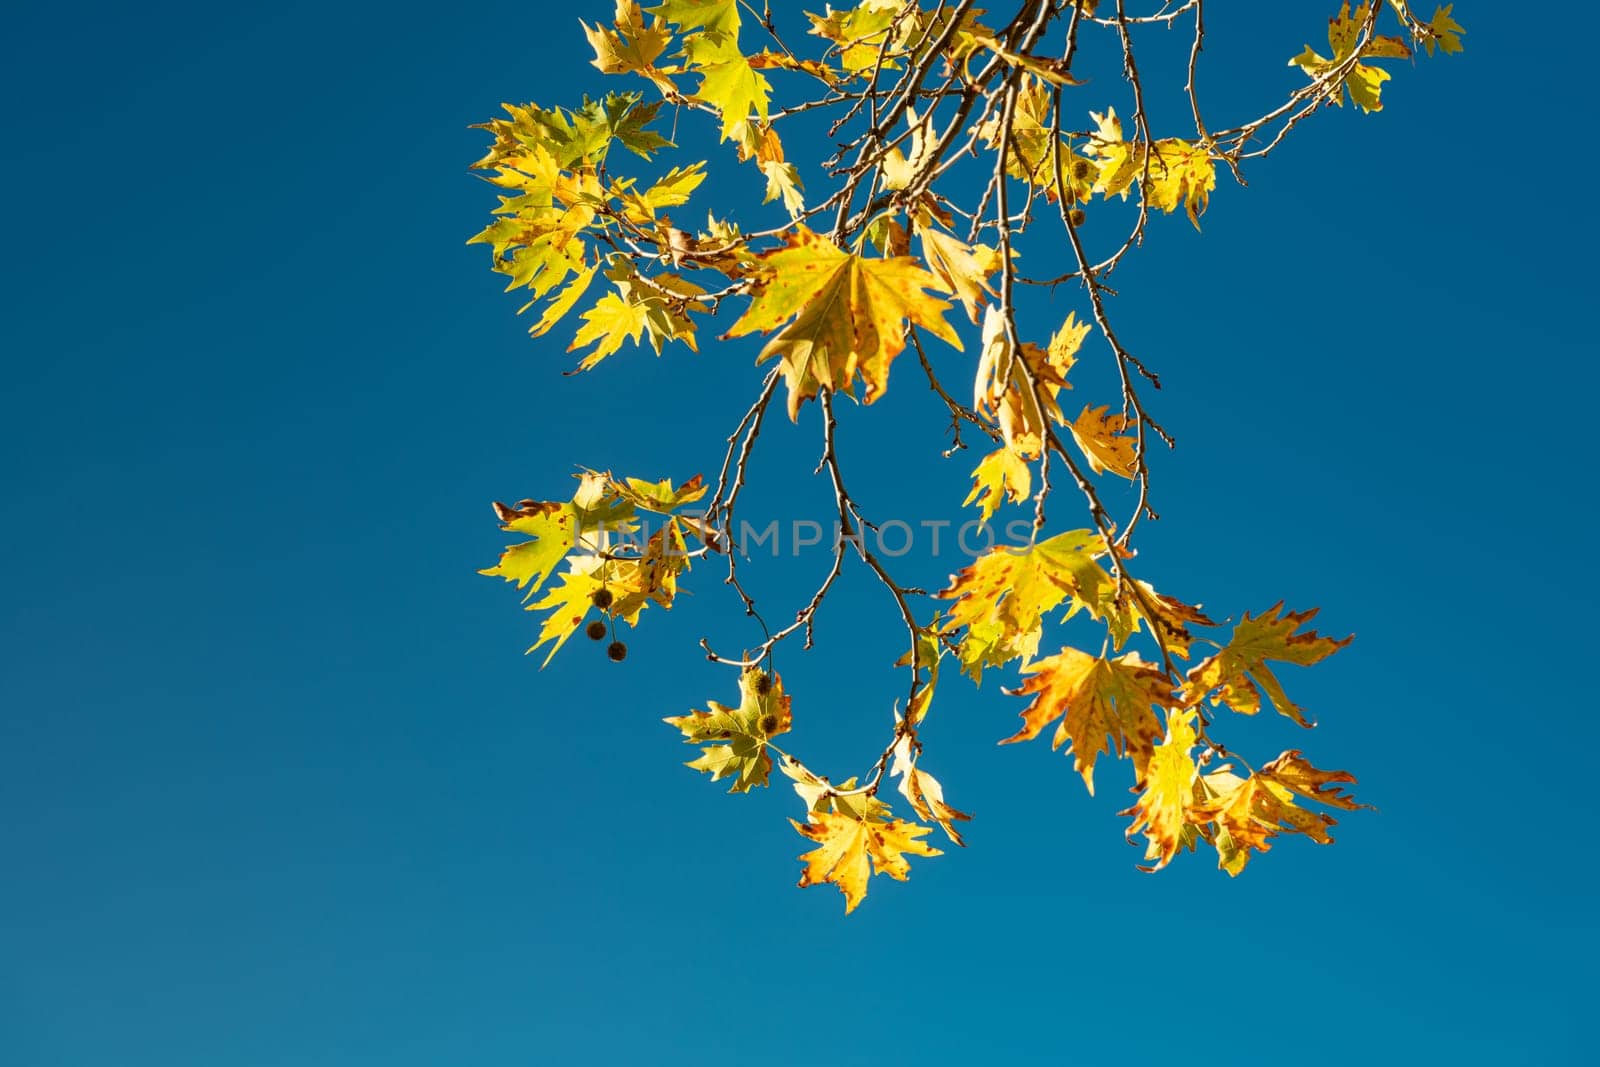 Yellowed leaves of plane tree in front of blue sunny sky in autumn